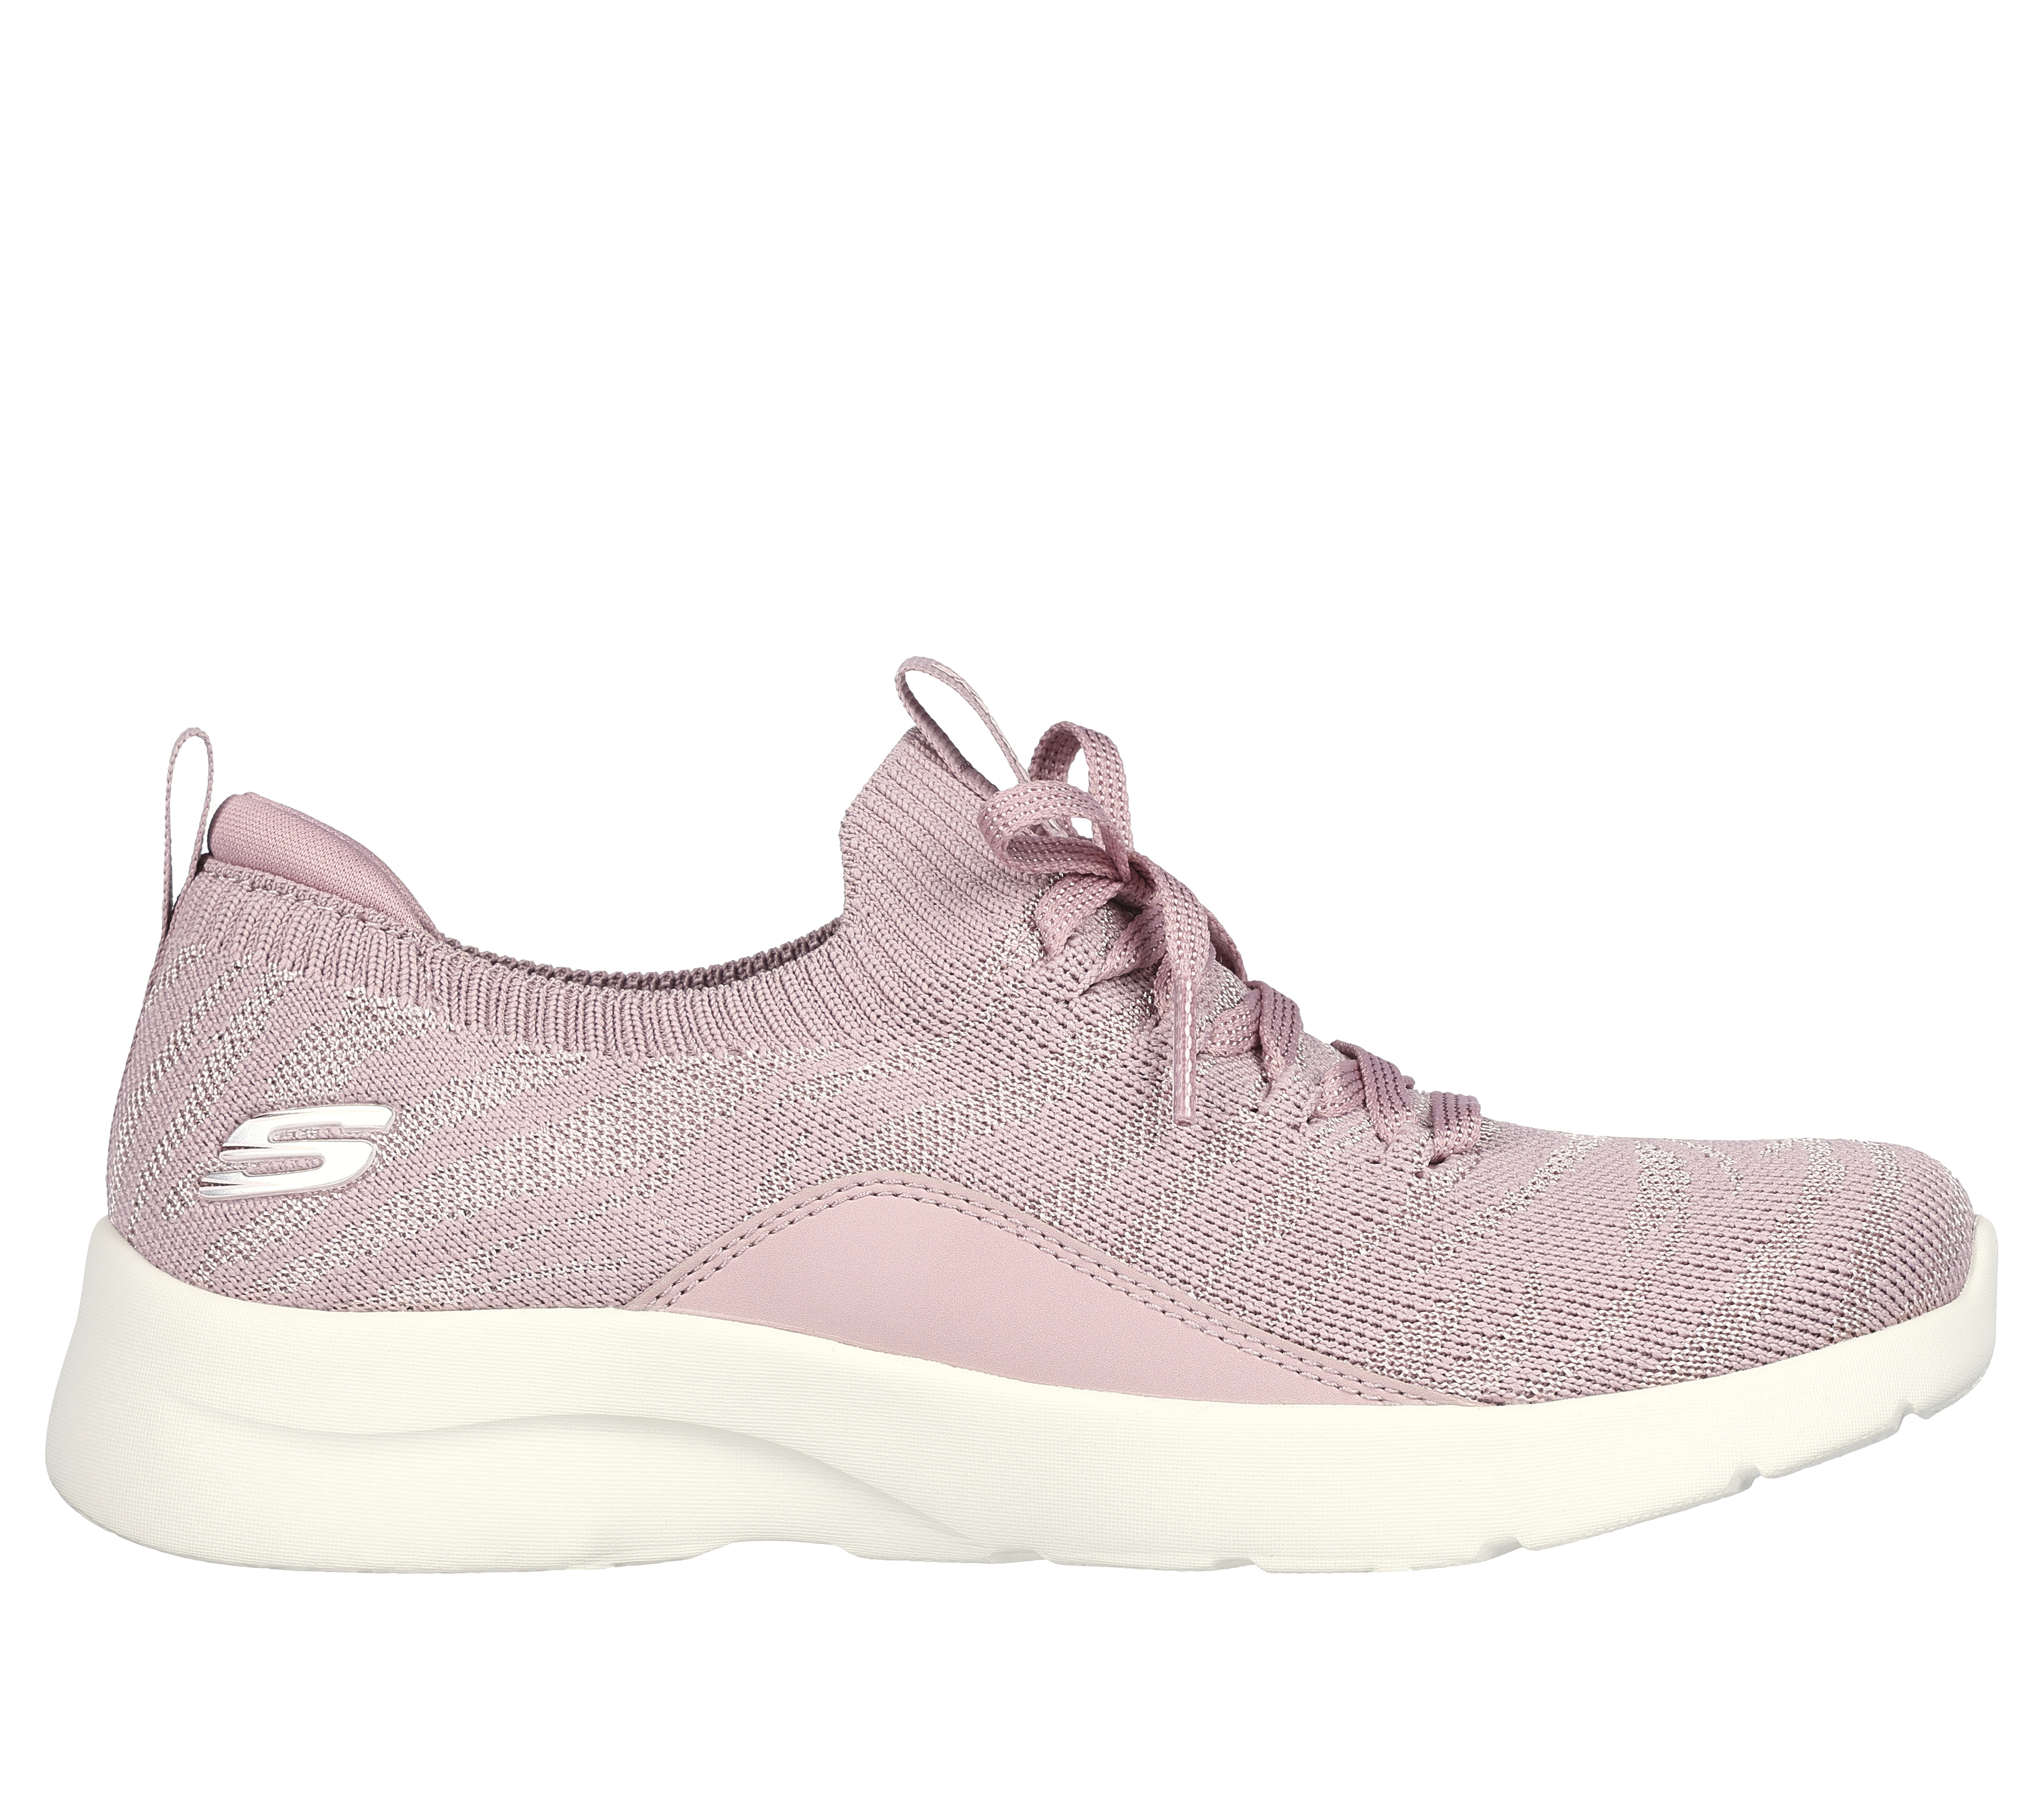 Shop the Dynamight 2.0 - Pounce Back | SKECHERS CA